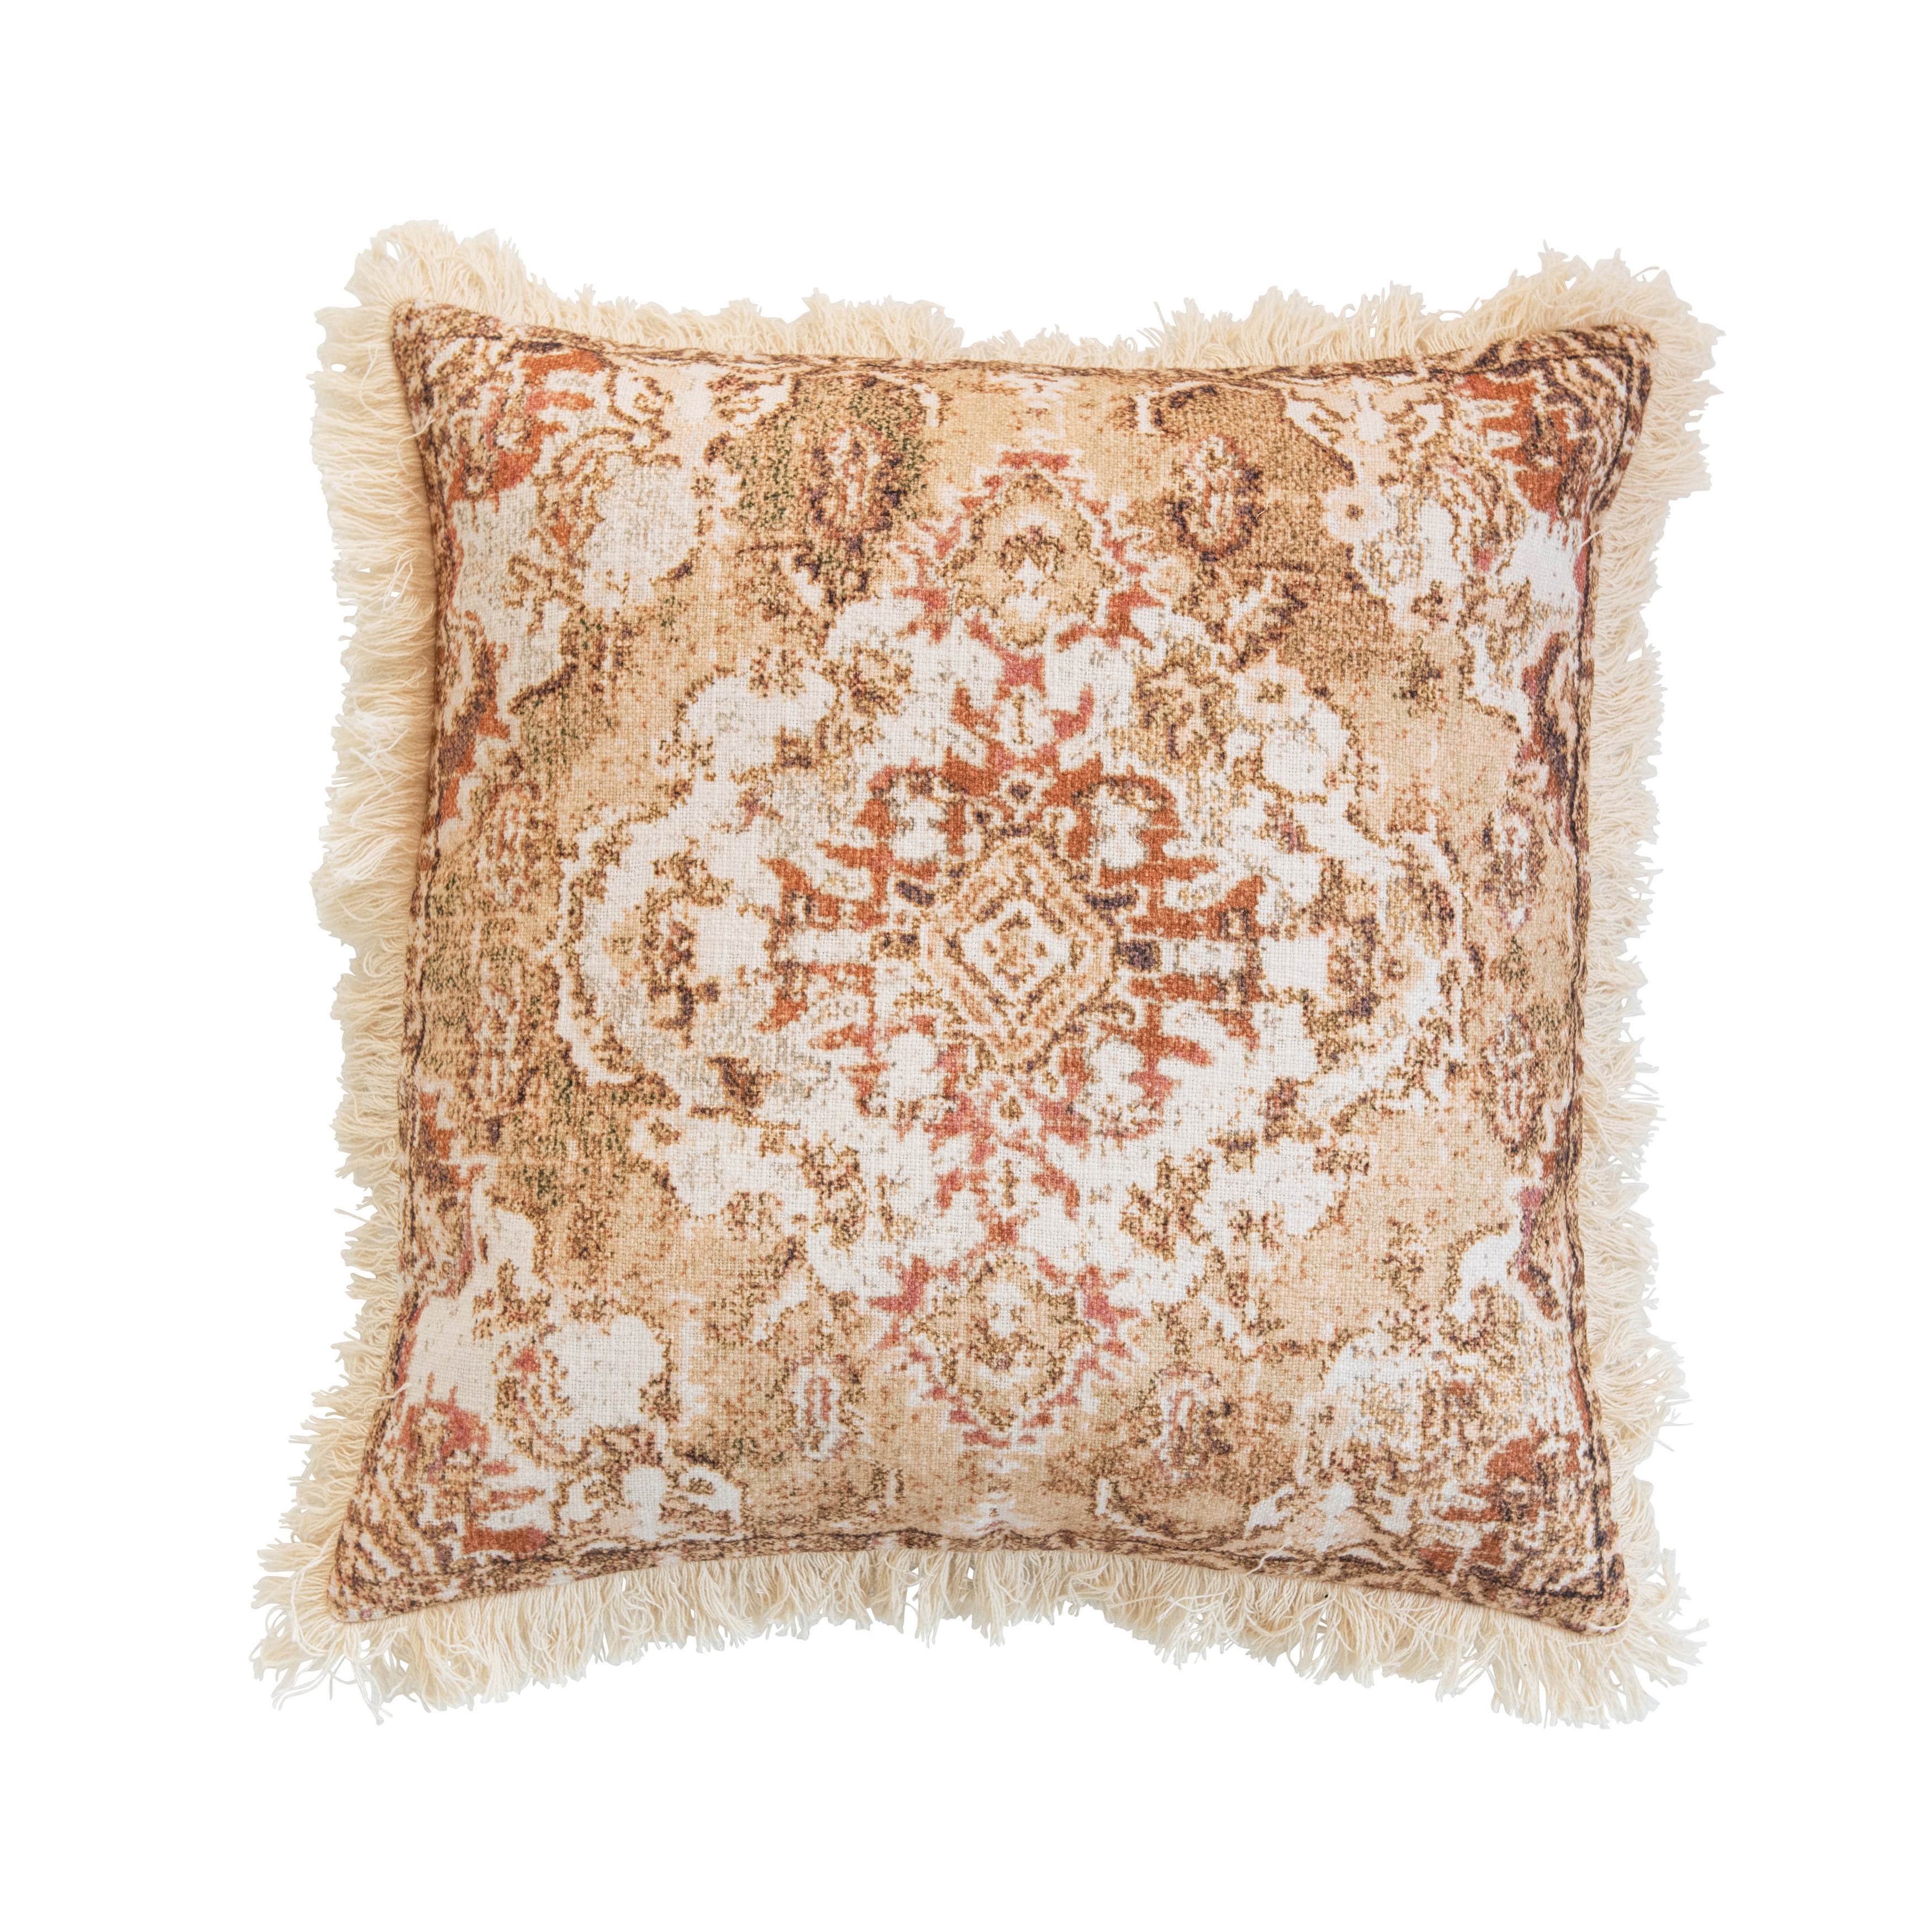 Distressed Cotton Printed Pillow with Fringe, Multi Color - Image 0